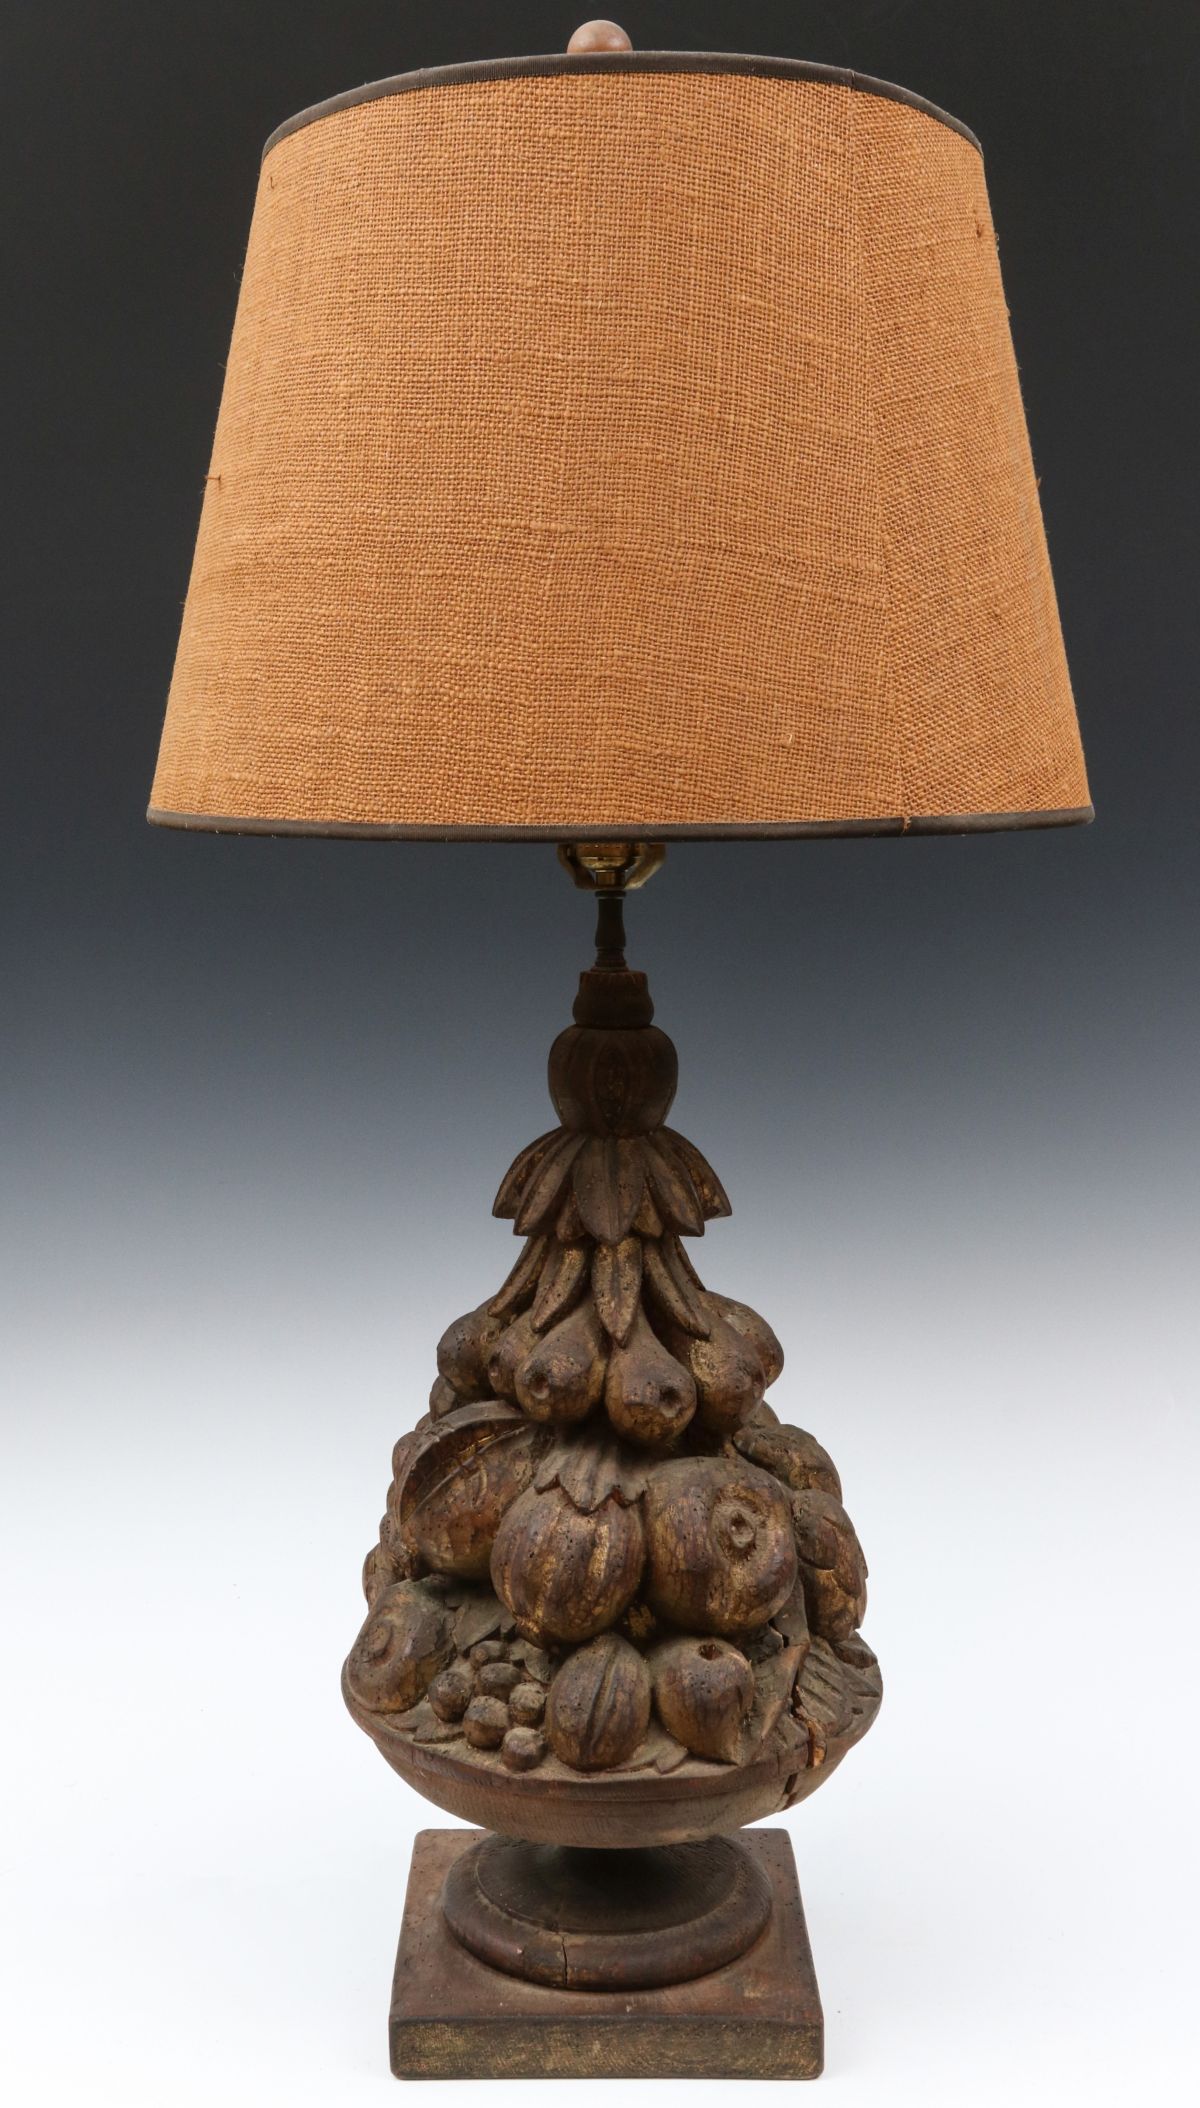 AN 18TH/19TH C. FRENCH CARVING NOW A TABLE LAMP